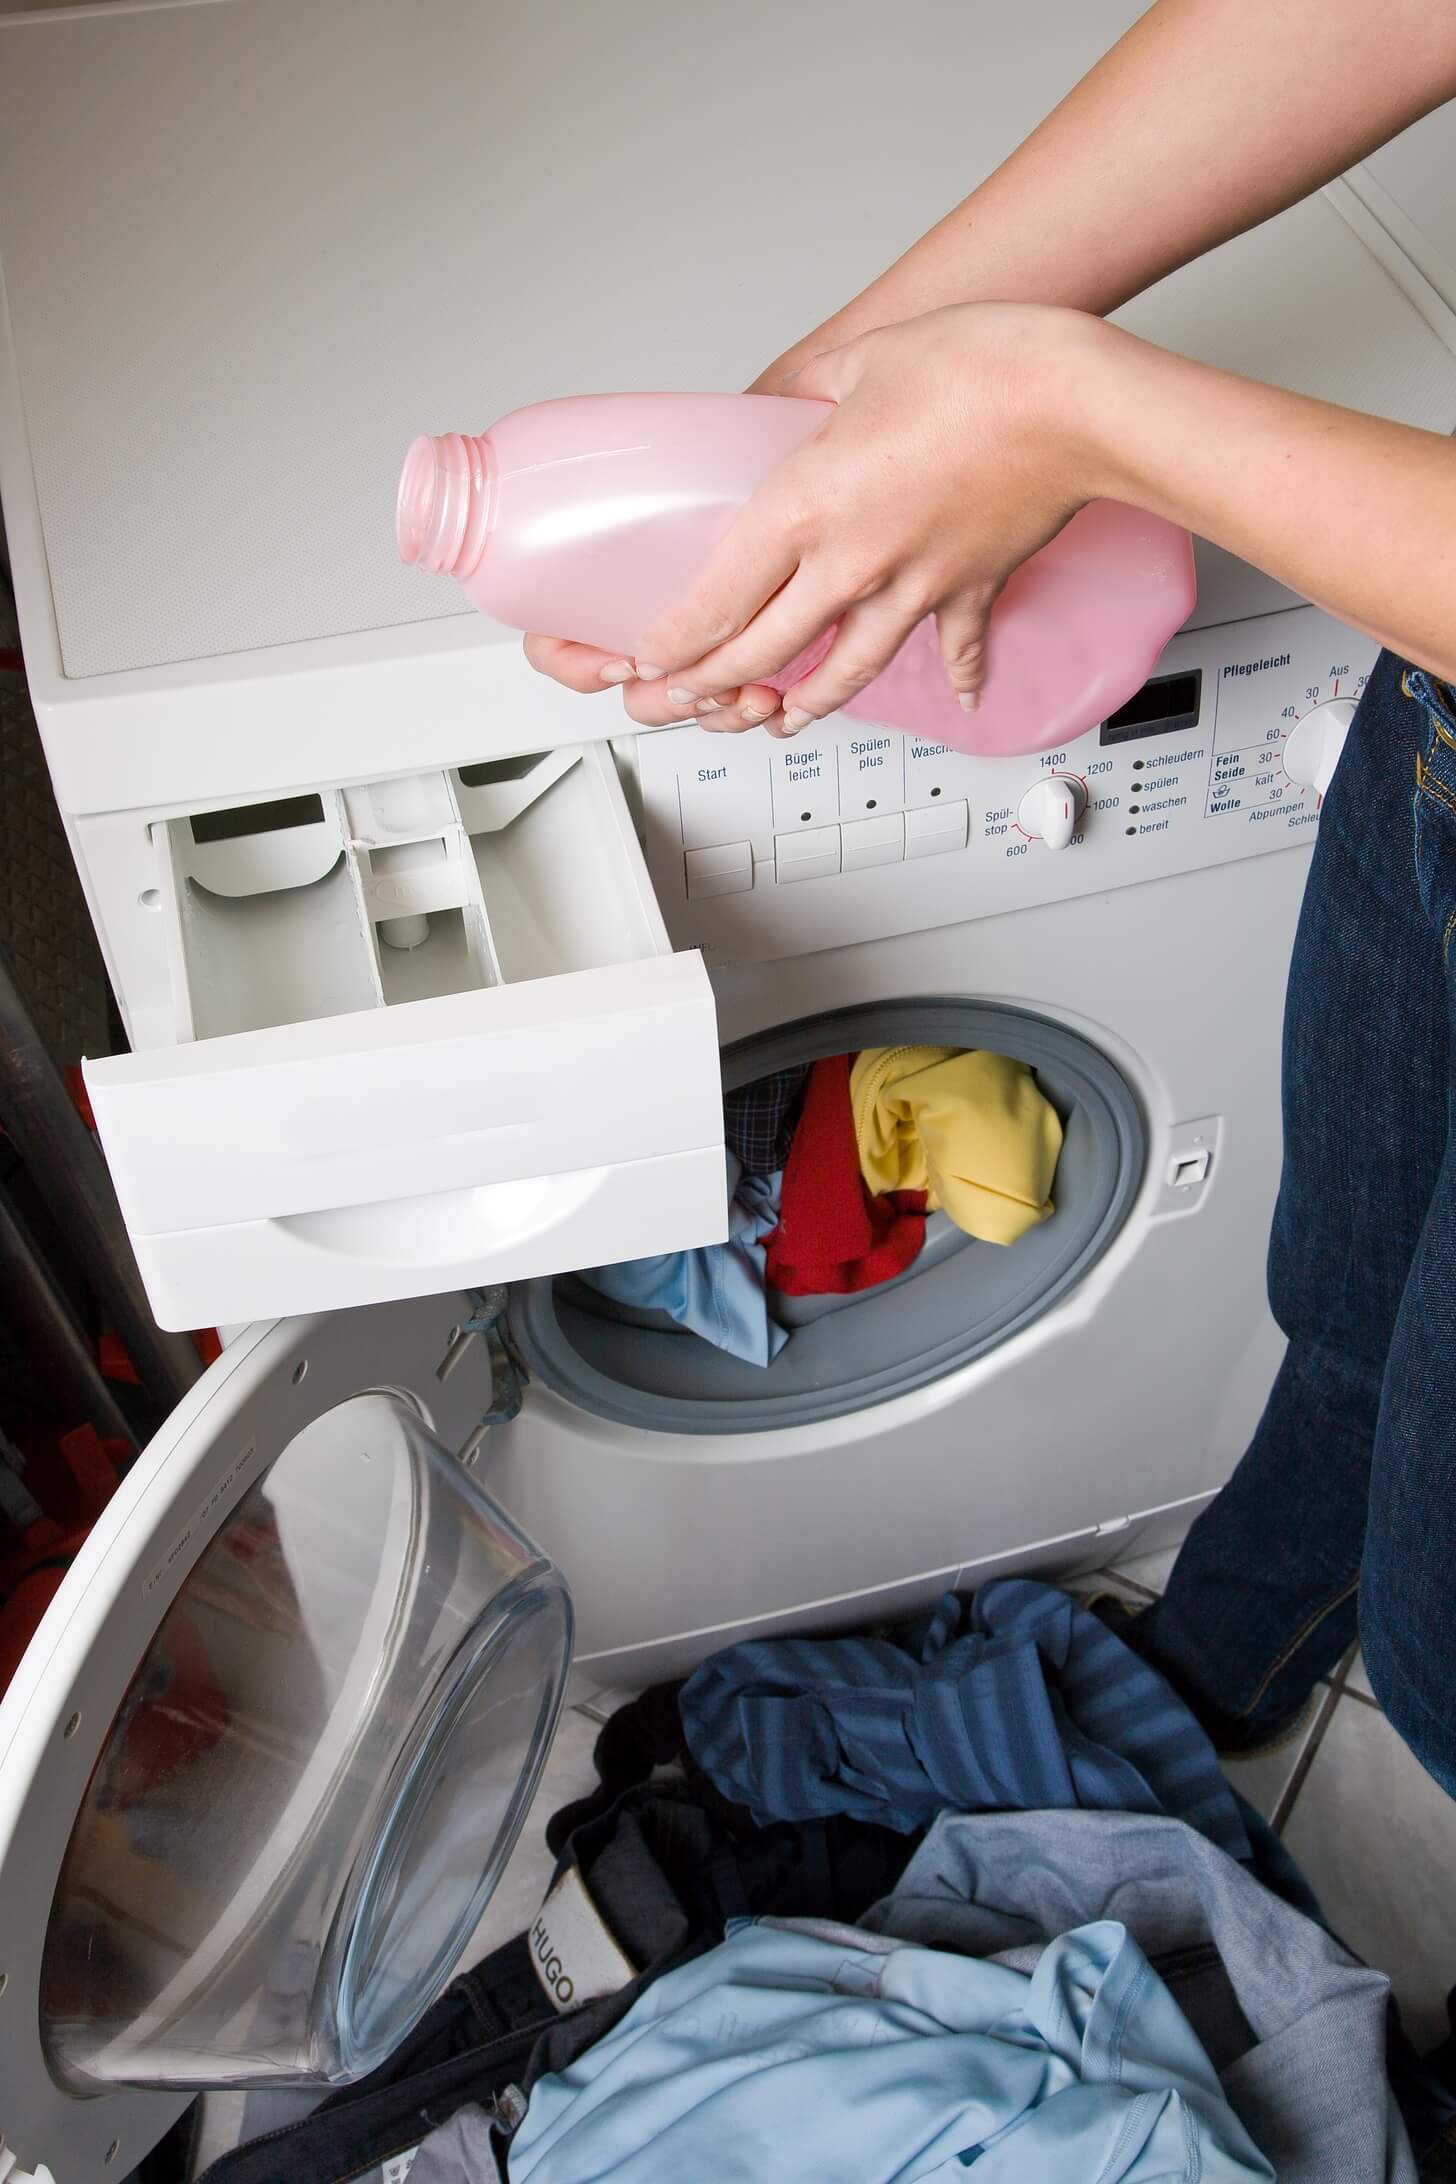 A person putting laundry detergent into a washing machine